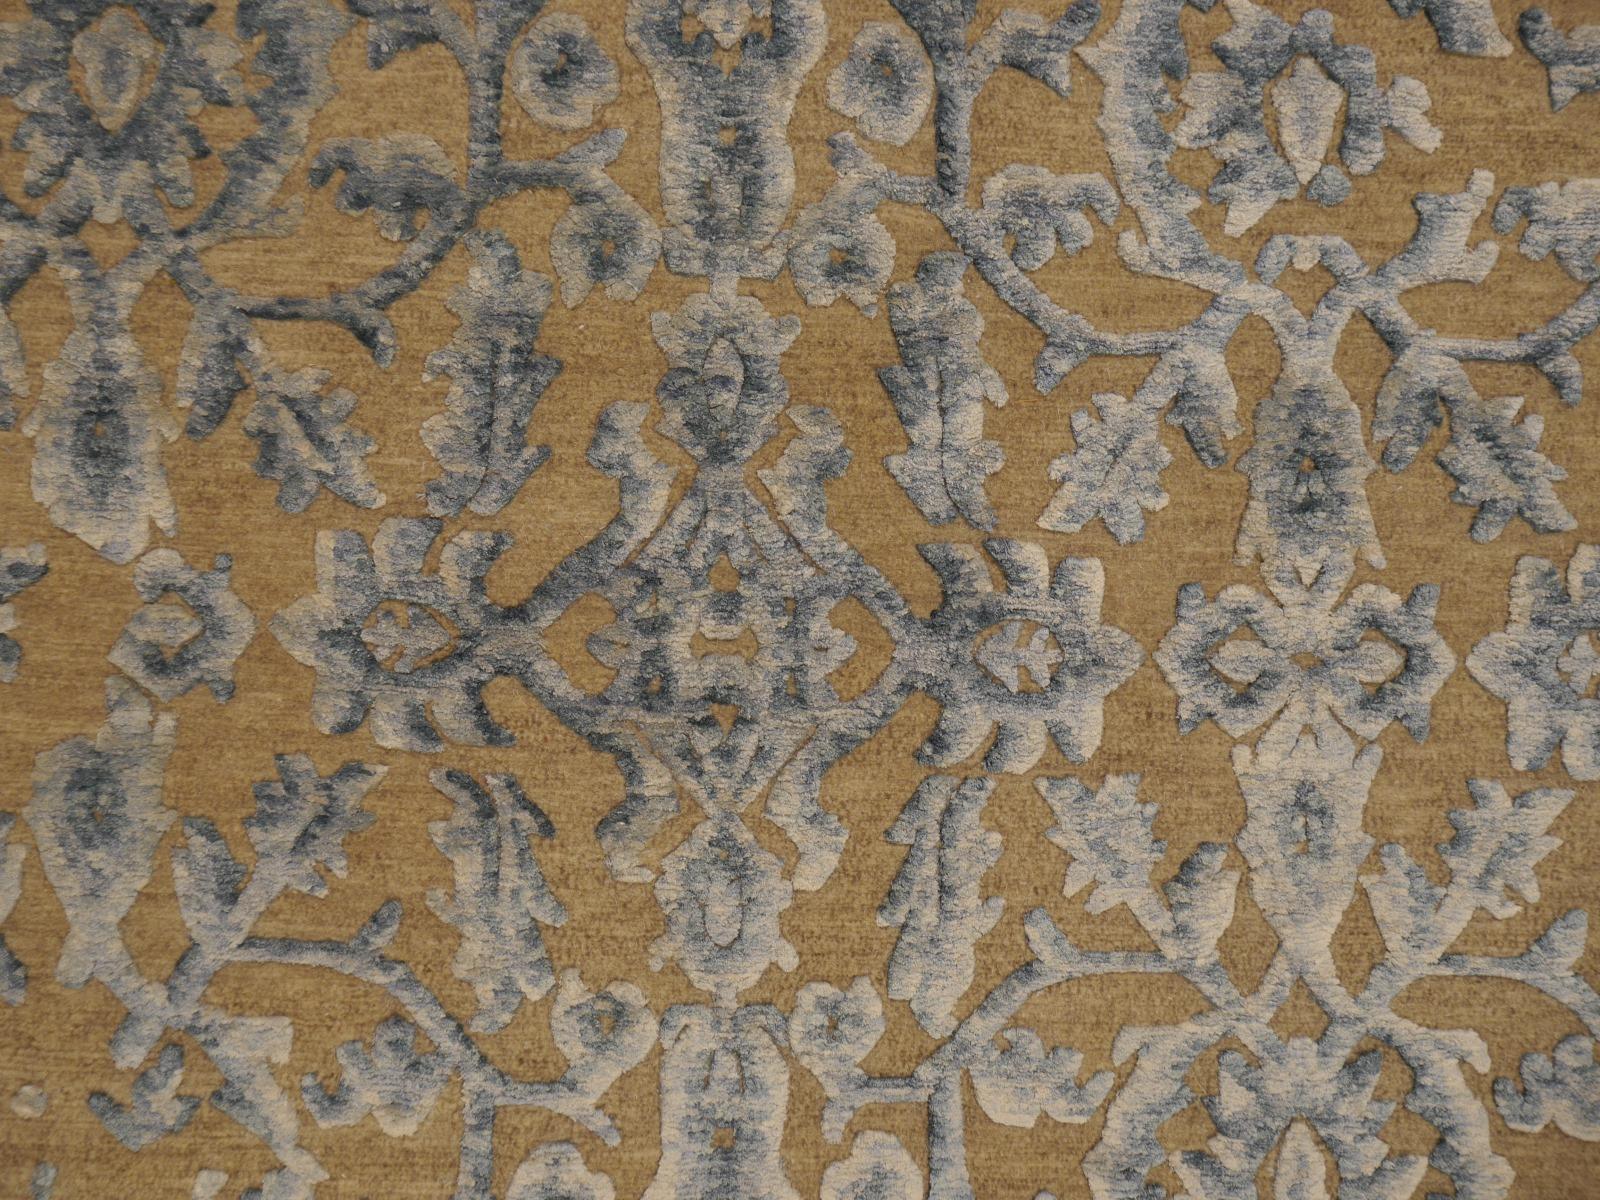 Contemporary Tabriz Erased Modern Design Persian Rug Hand Knotted Wool and Silk Tan Blue For Sale